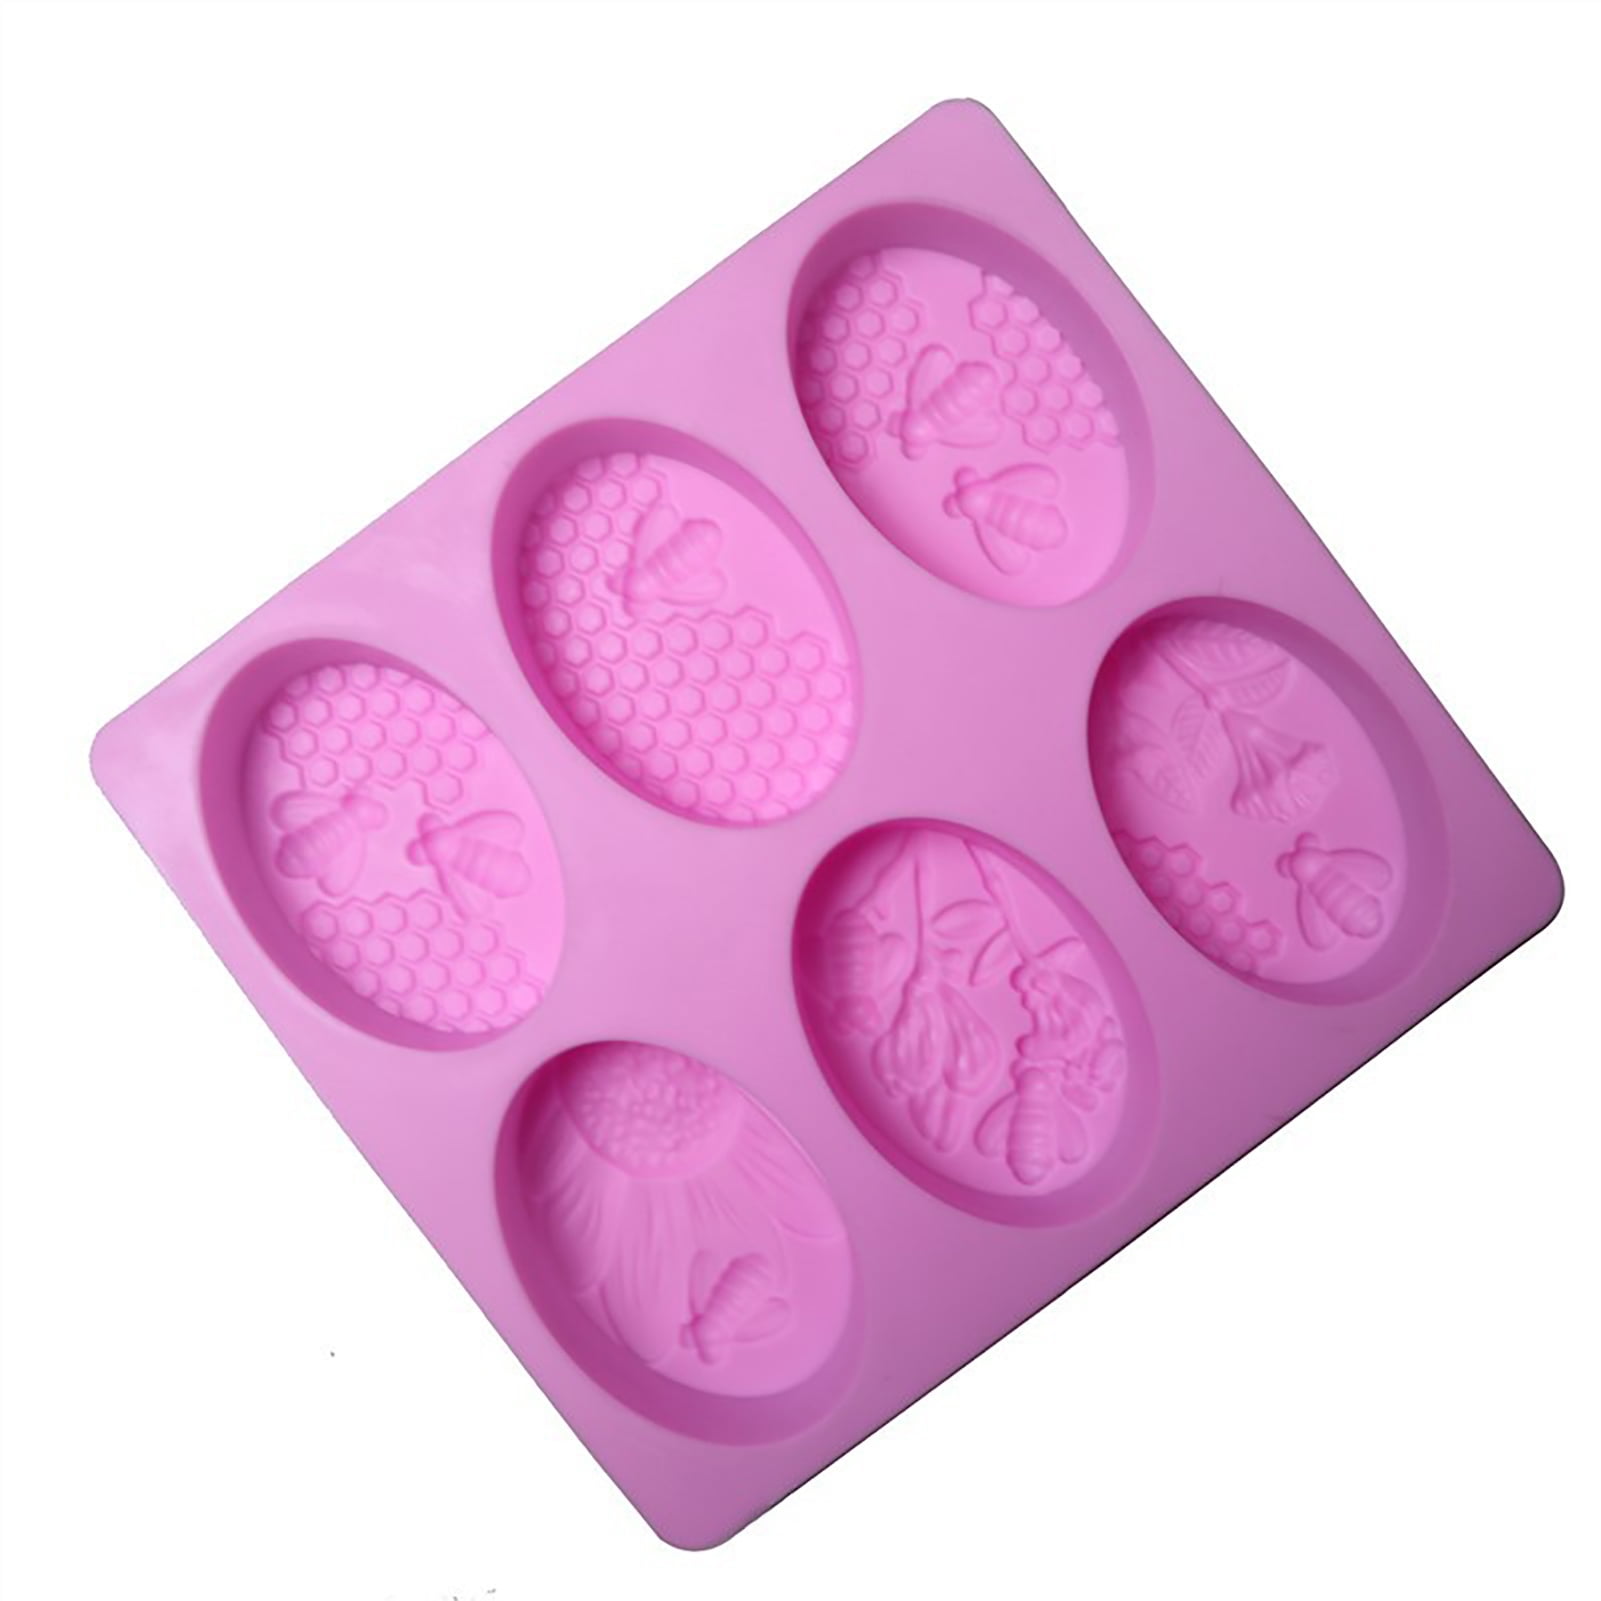 GMMGLT Honeycomb Cake Molds for Kids, Silicone Honey Comb Bees Soap Mold Cake Baking Moulds Pull-Apart Dessert Cake Pan Mold Release Easily Silicone